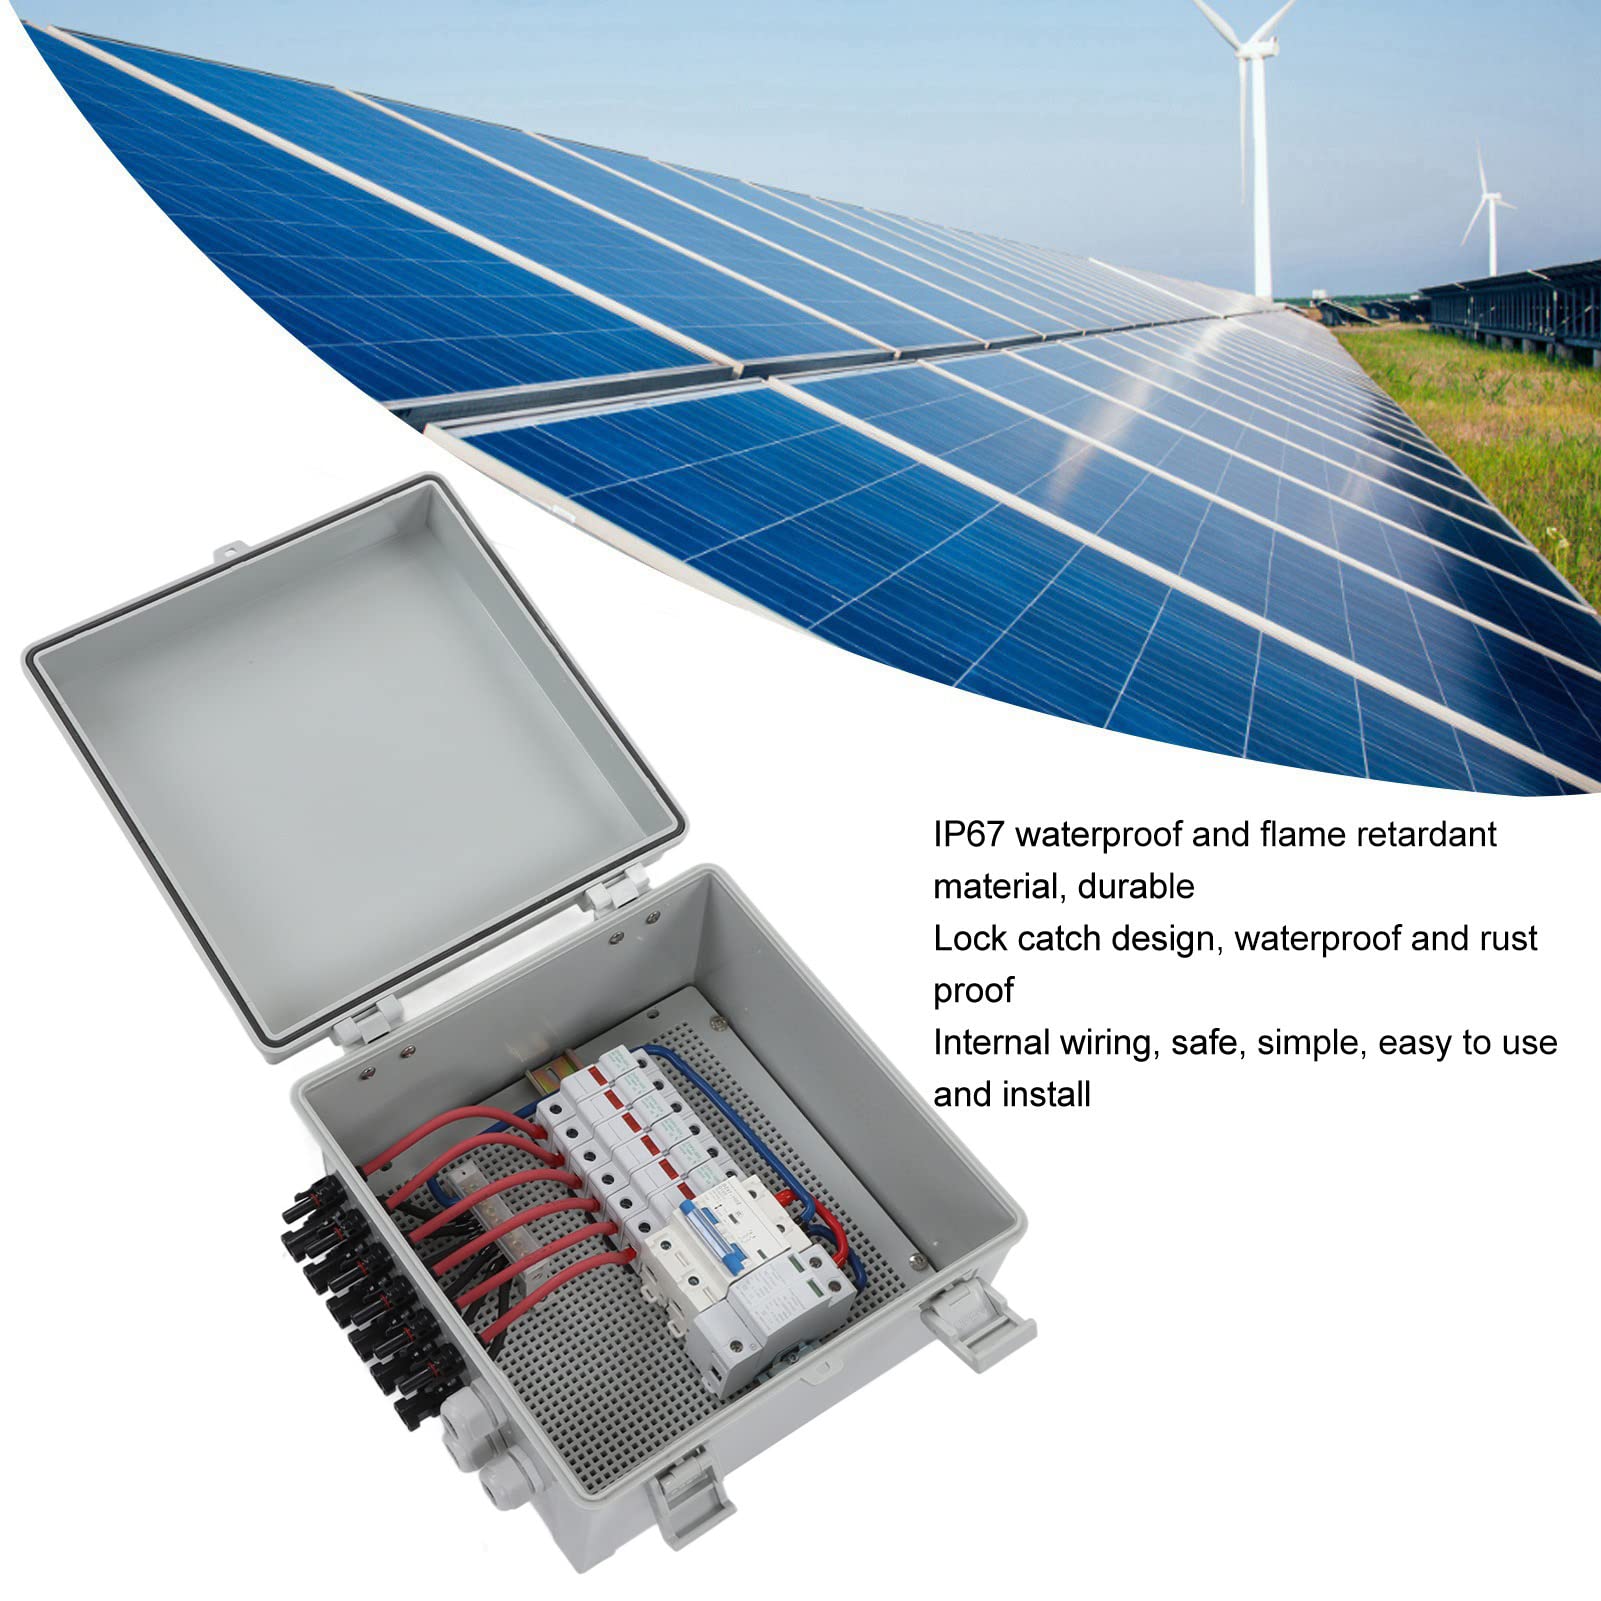 PV Combiner Box, 6 String Solar Combiner Box with 100A Circuit Breaker, 15A Rated Current and 40KA Protective Device IP67 Waterproof for On Off Grid Solar Panel System